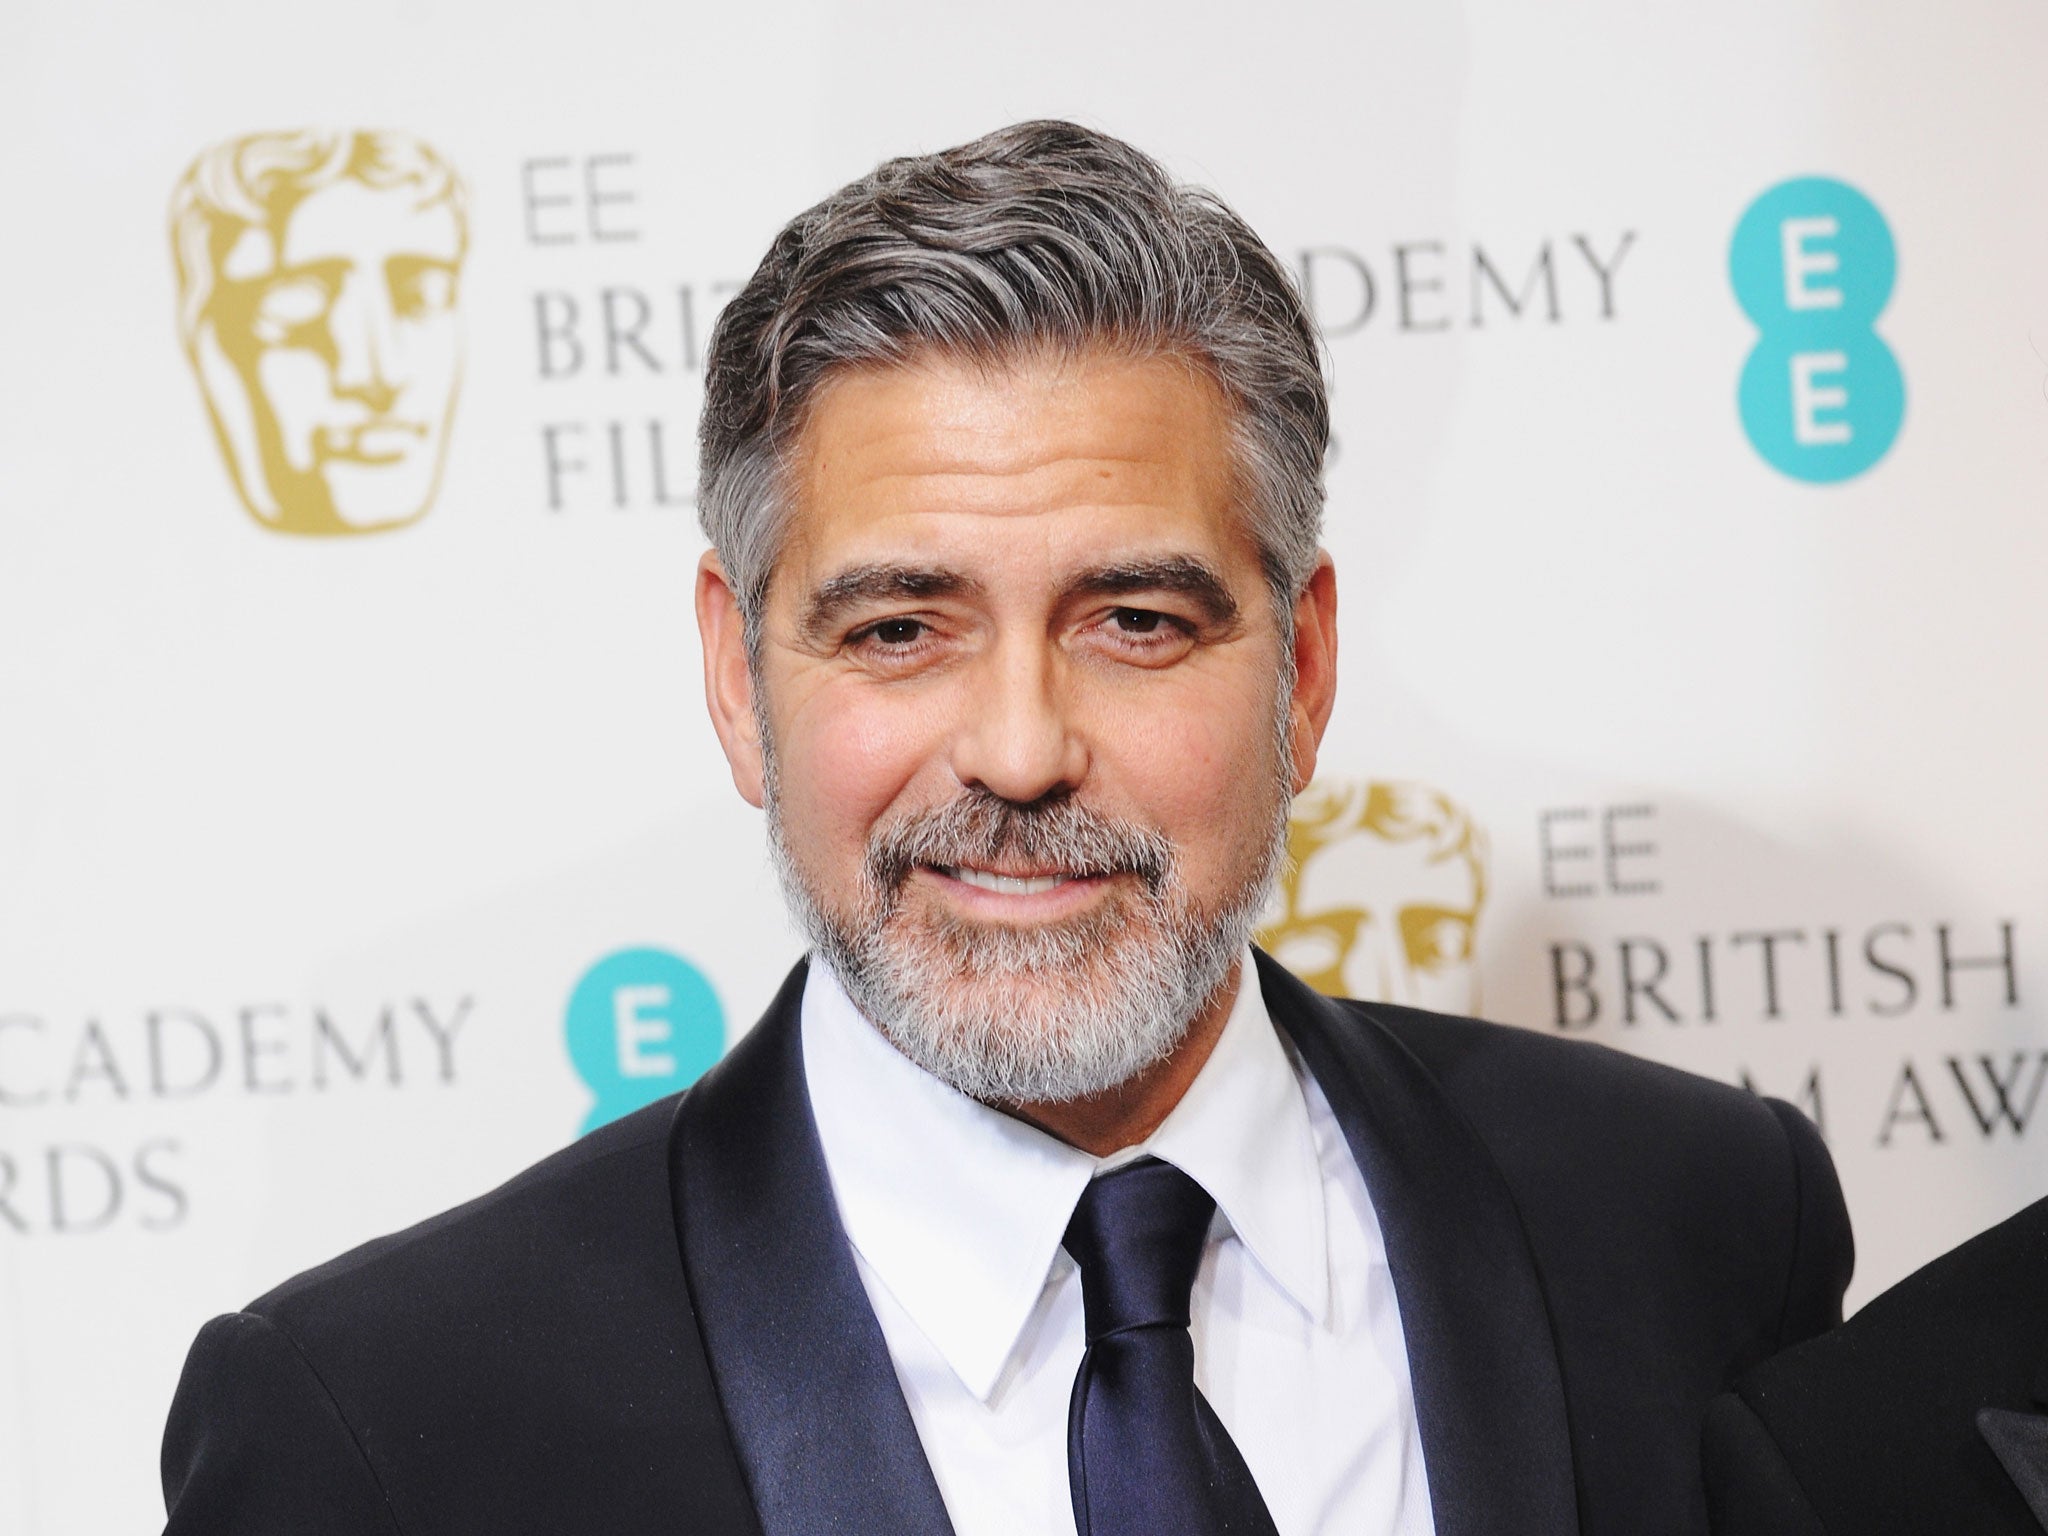 George Clooney, winner of the Best Film award for 'Argo', poses in the press room at the EE British Academy Film Awards at The Royal Opera House on February 10, 2013 in London, England.